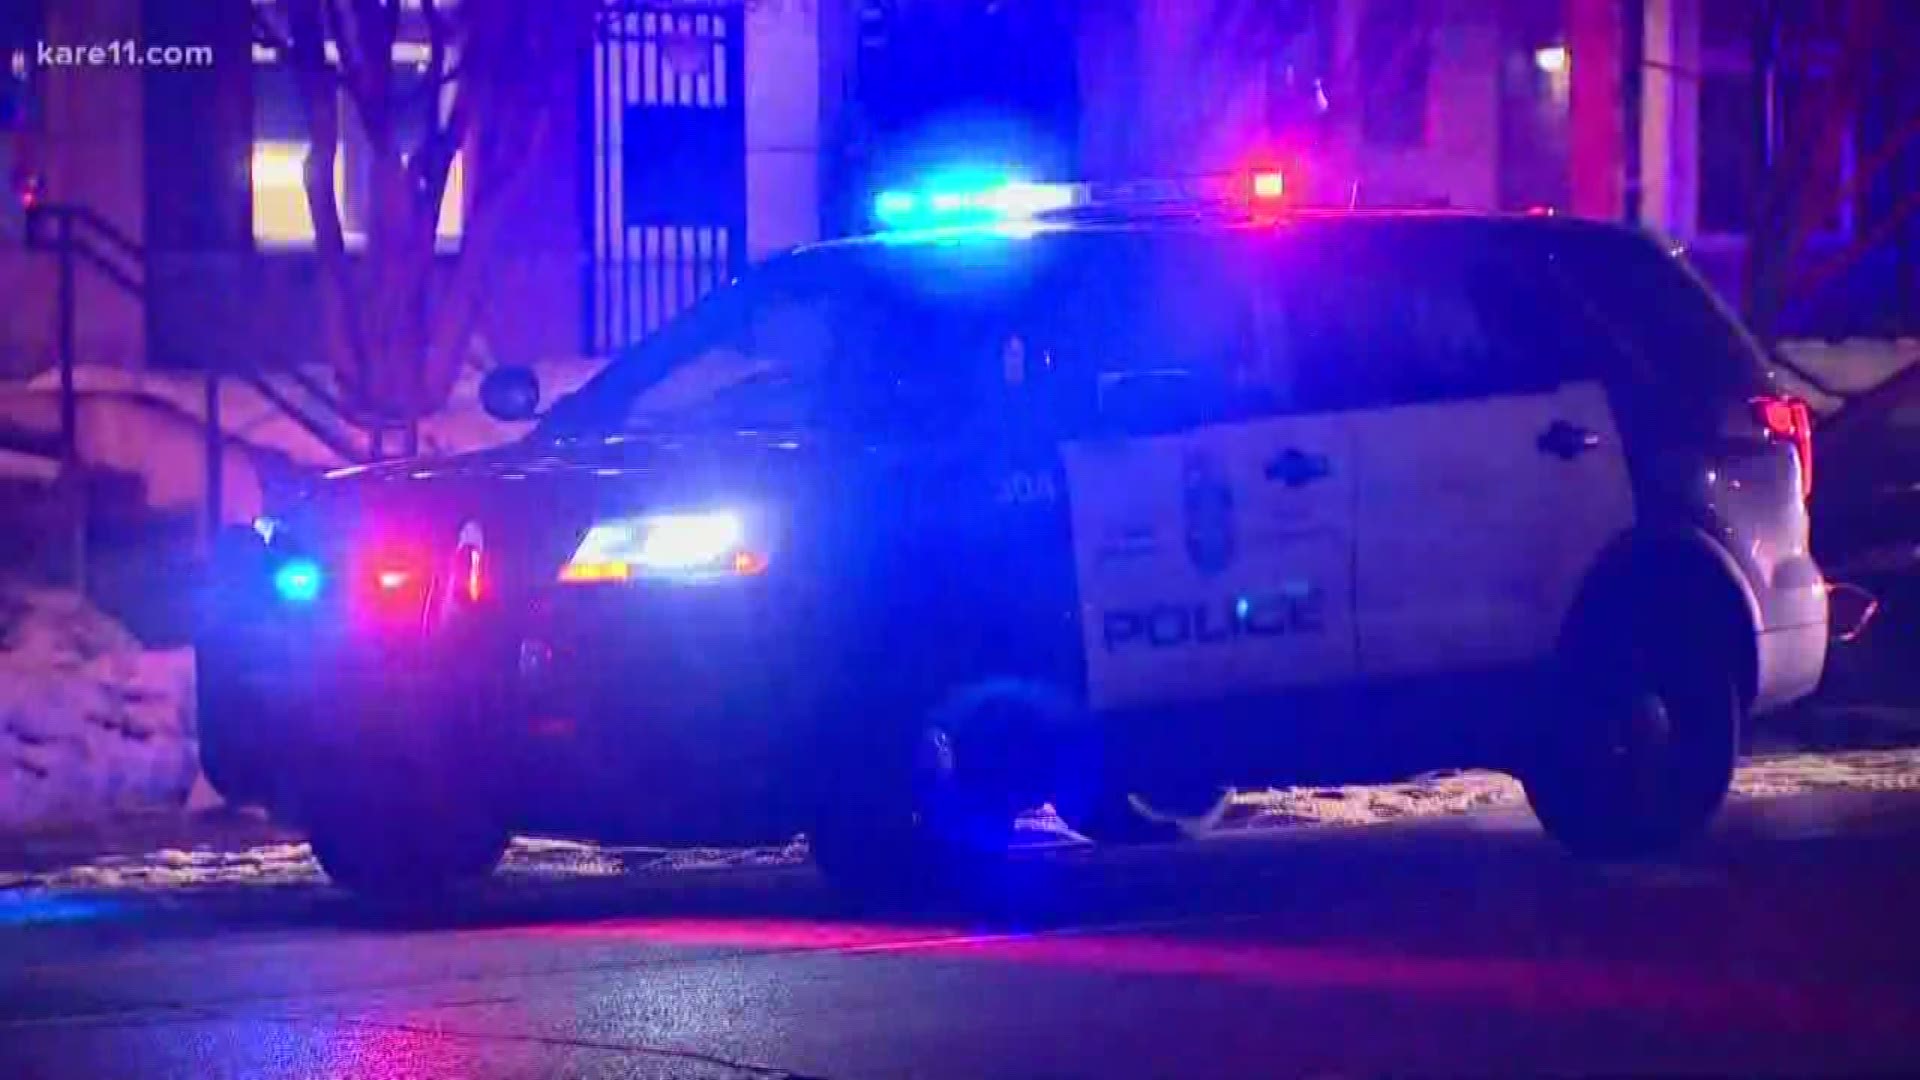 Minneapolis police are investigating a homicide after responding to a report of shots fired Sunday.